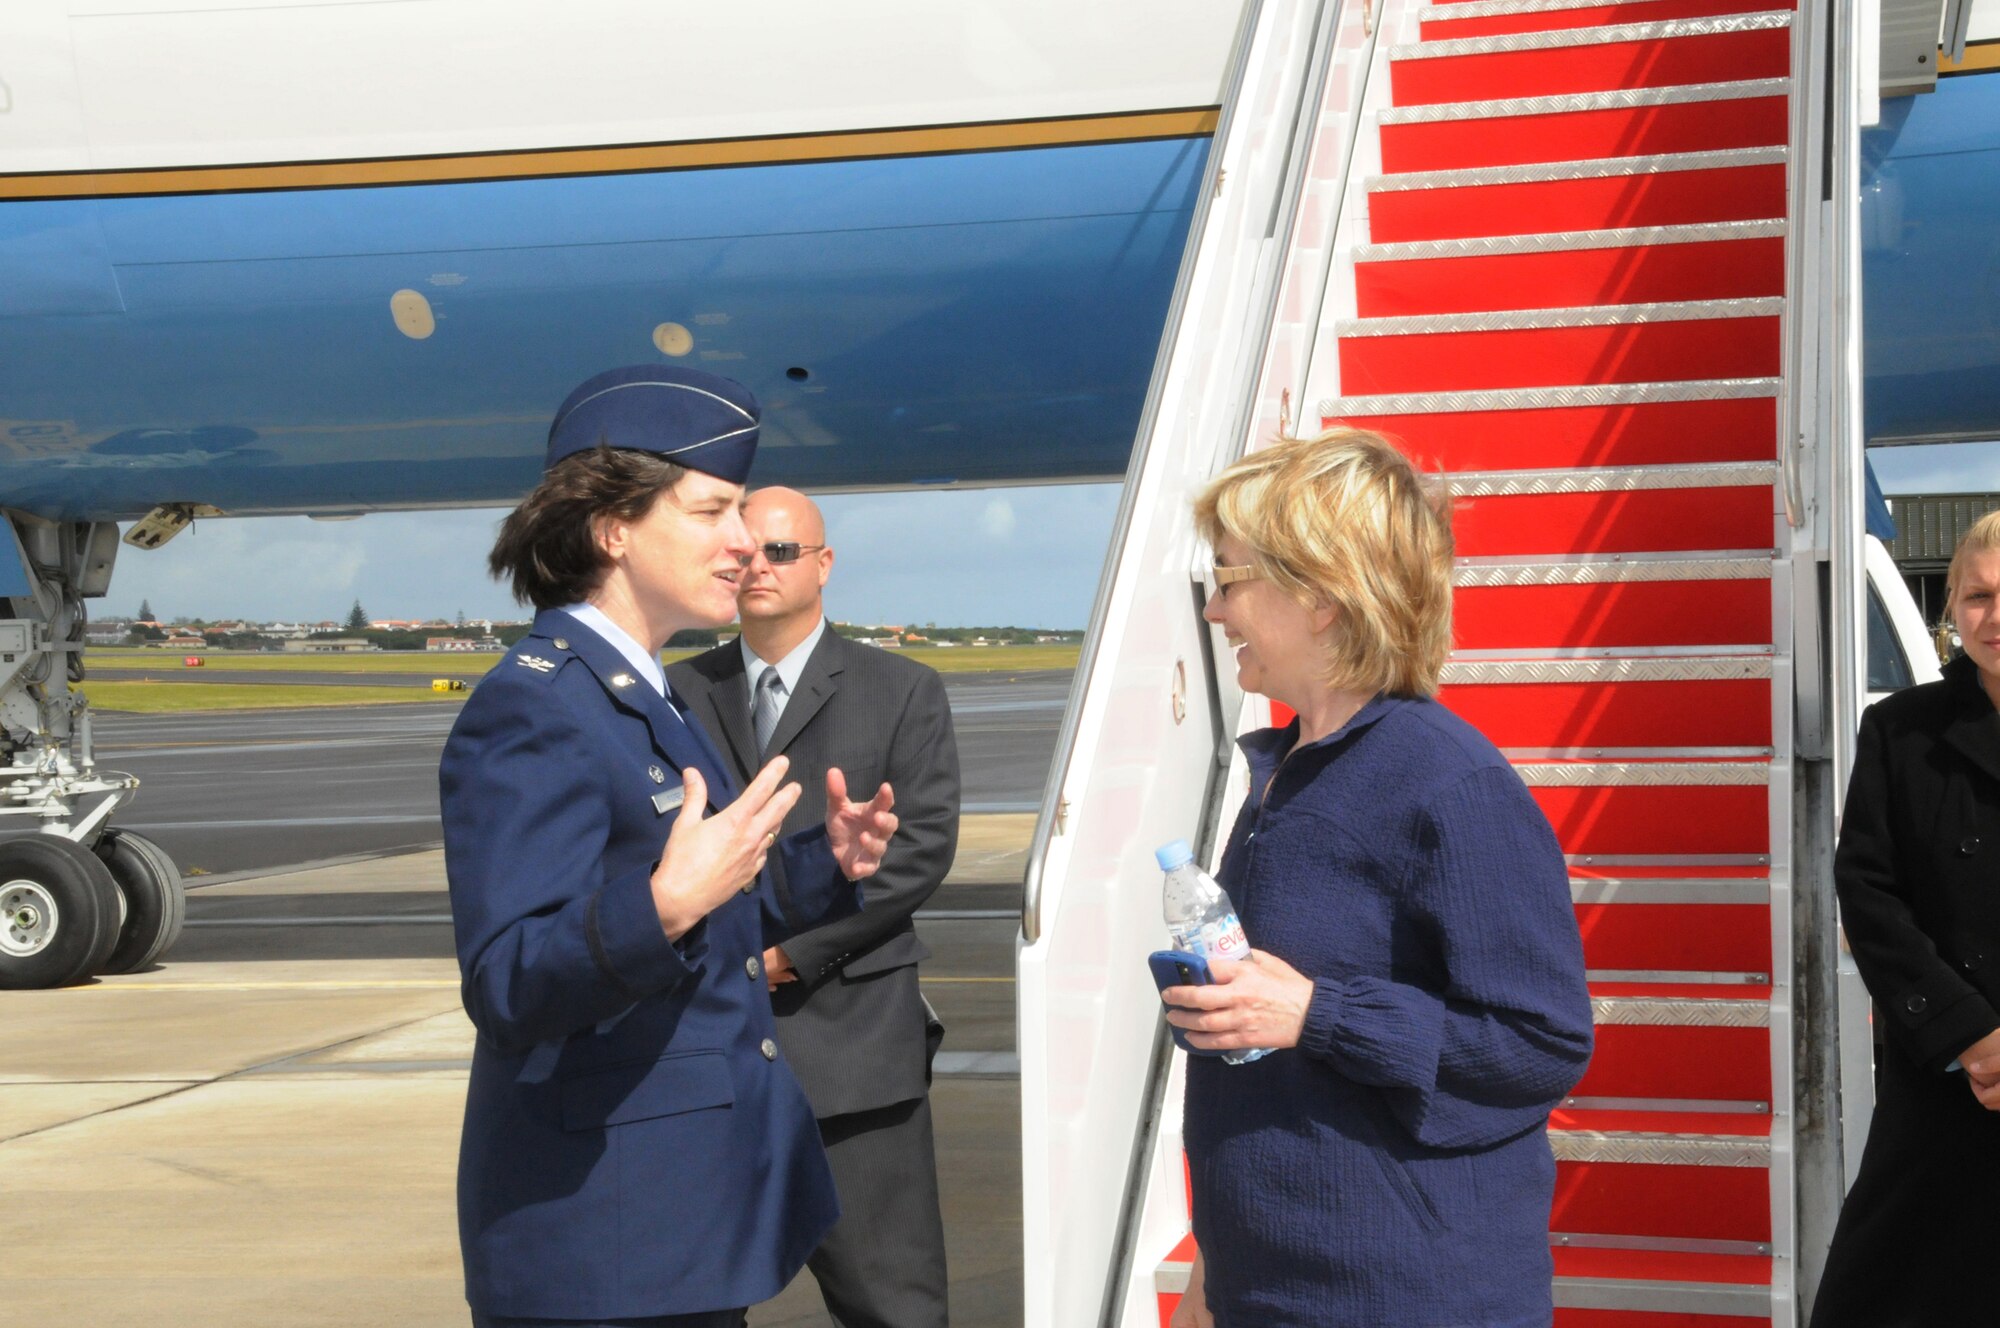 65th Air Base Wing Commander, Col. Peggy Poore, greets Secretary of State Hillary Rodham Clinton during a stop at Lajes Field, Azores, Portugal on June 3.  Secretary Clinton stopped here en route to Cairo, Egypt to join President Barack Obama for his speech, and participate in the President's meeting with President Hosni Mubarak. (U.S. Air Force photo by Tech Sgt. Rebecca F. Corey)